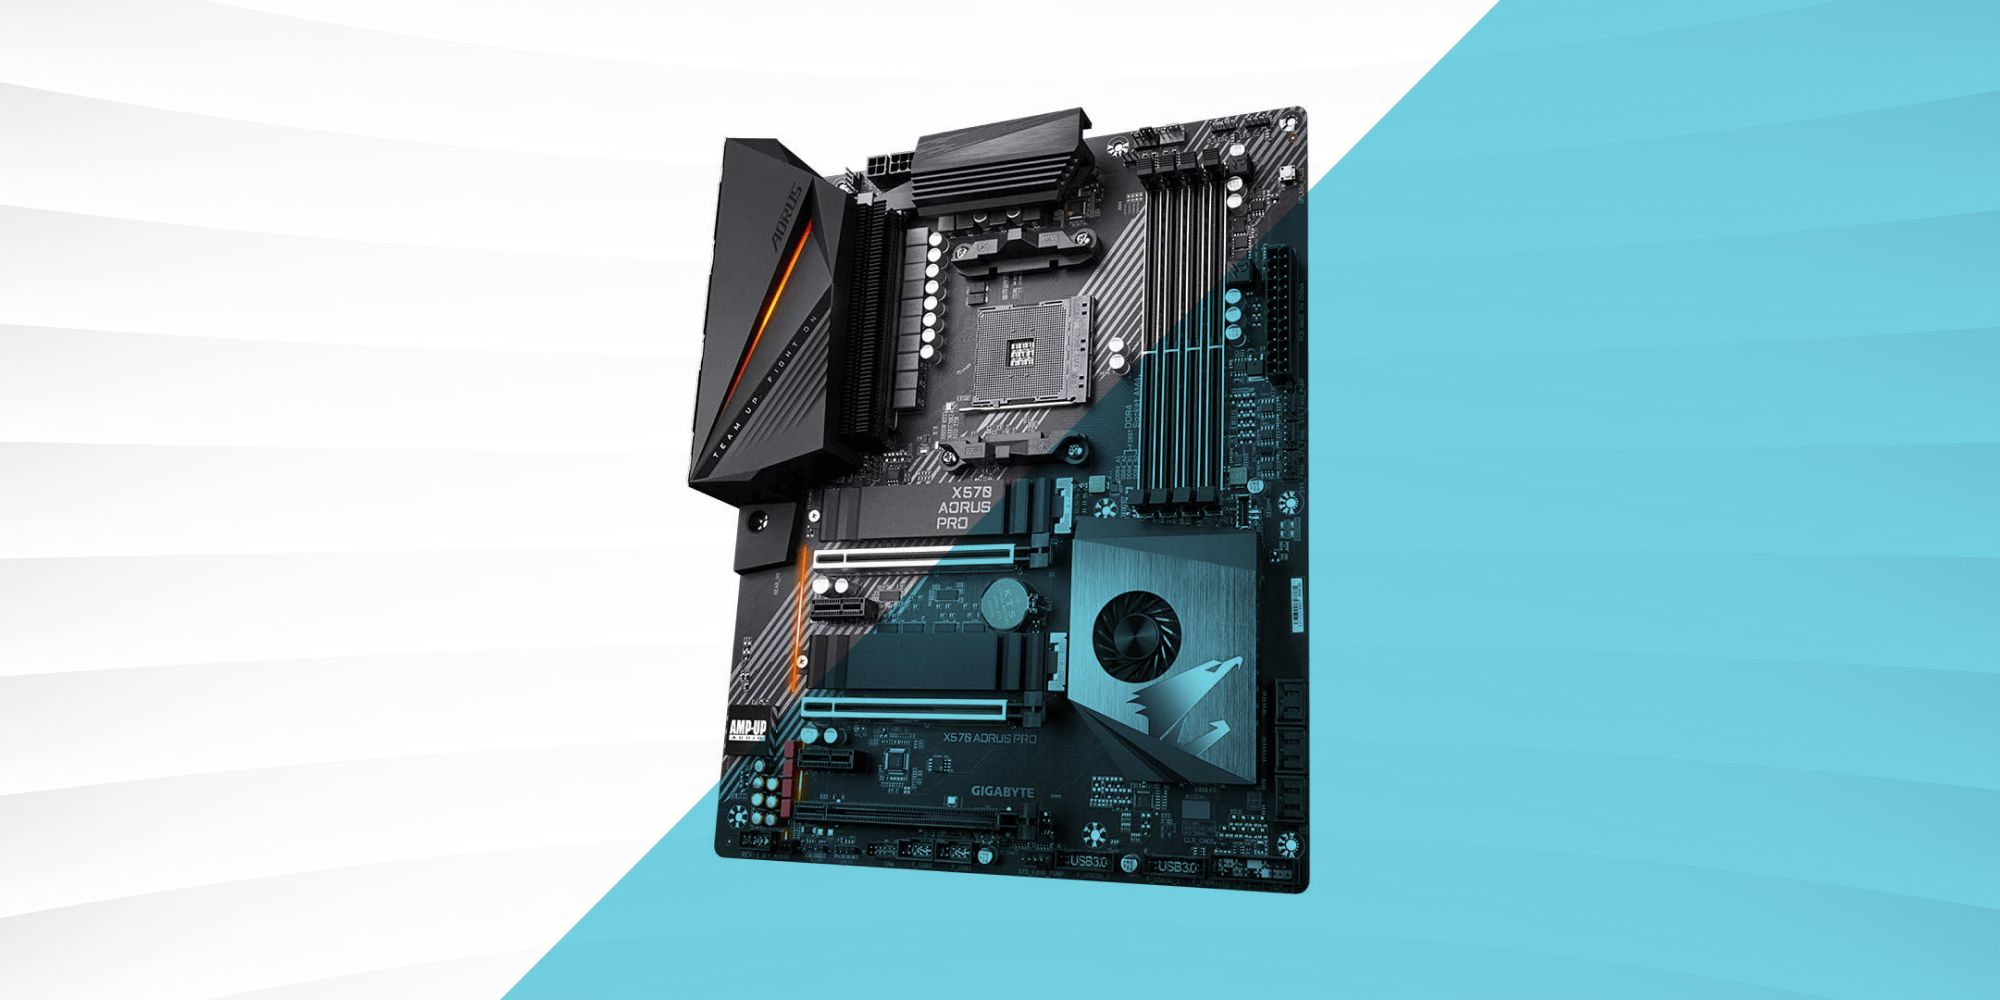 Prime grijnzend Leed The 6 Best Motherboards for Your PC in 2021 - PC Motherboards